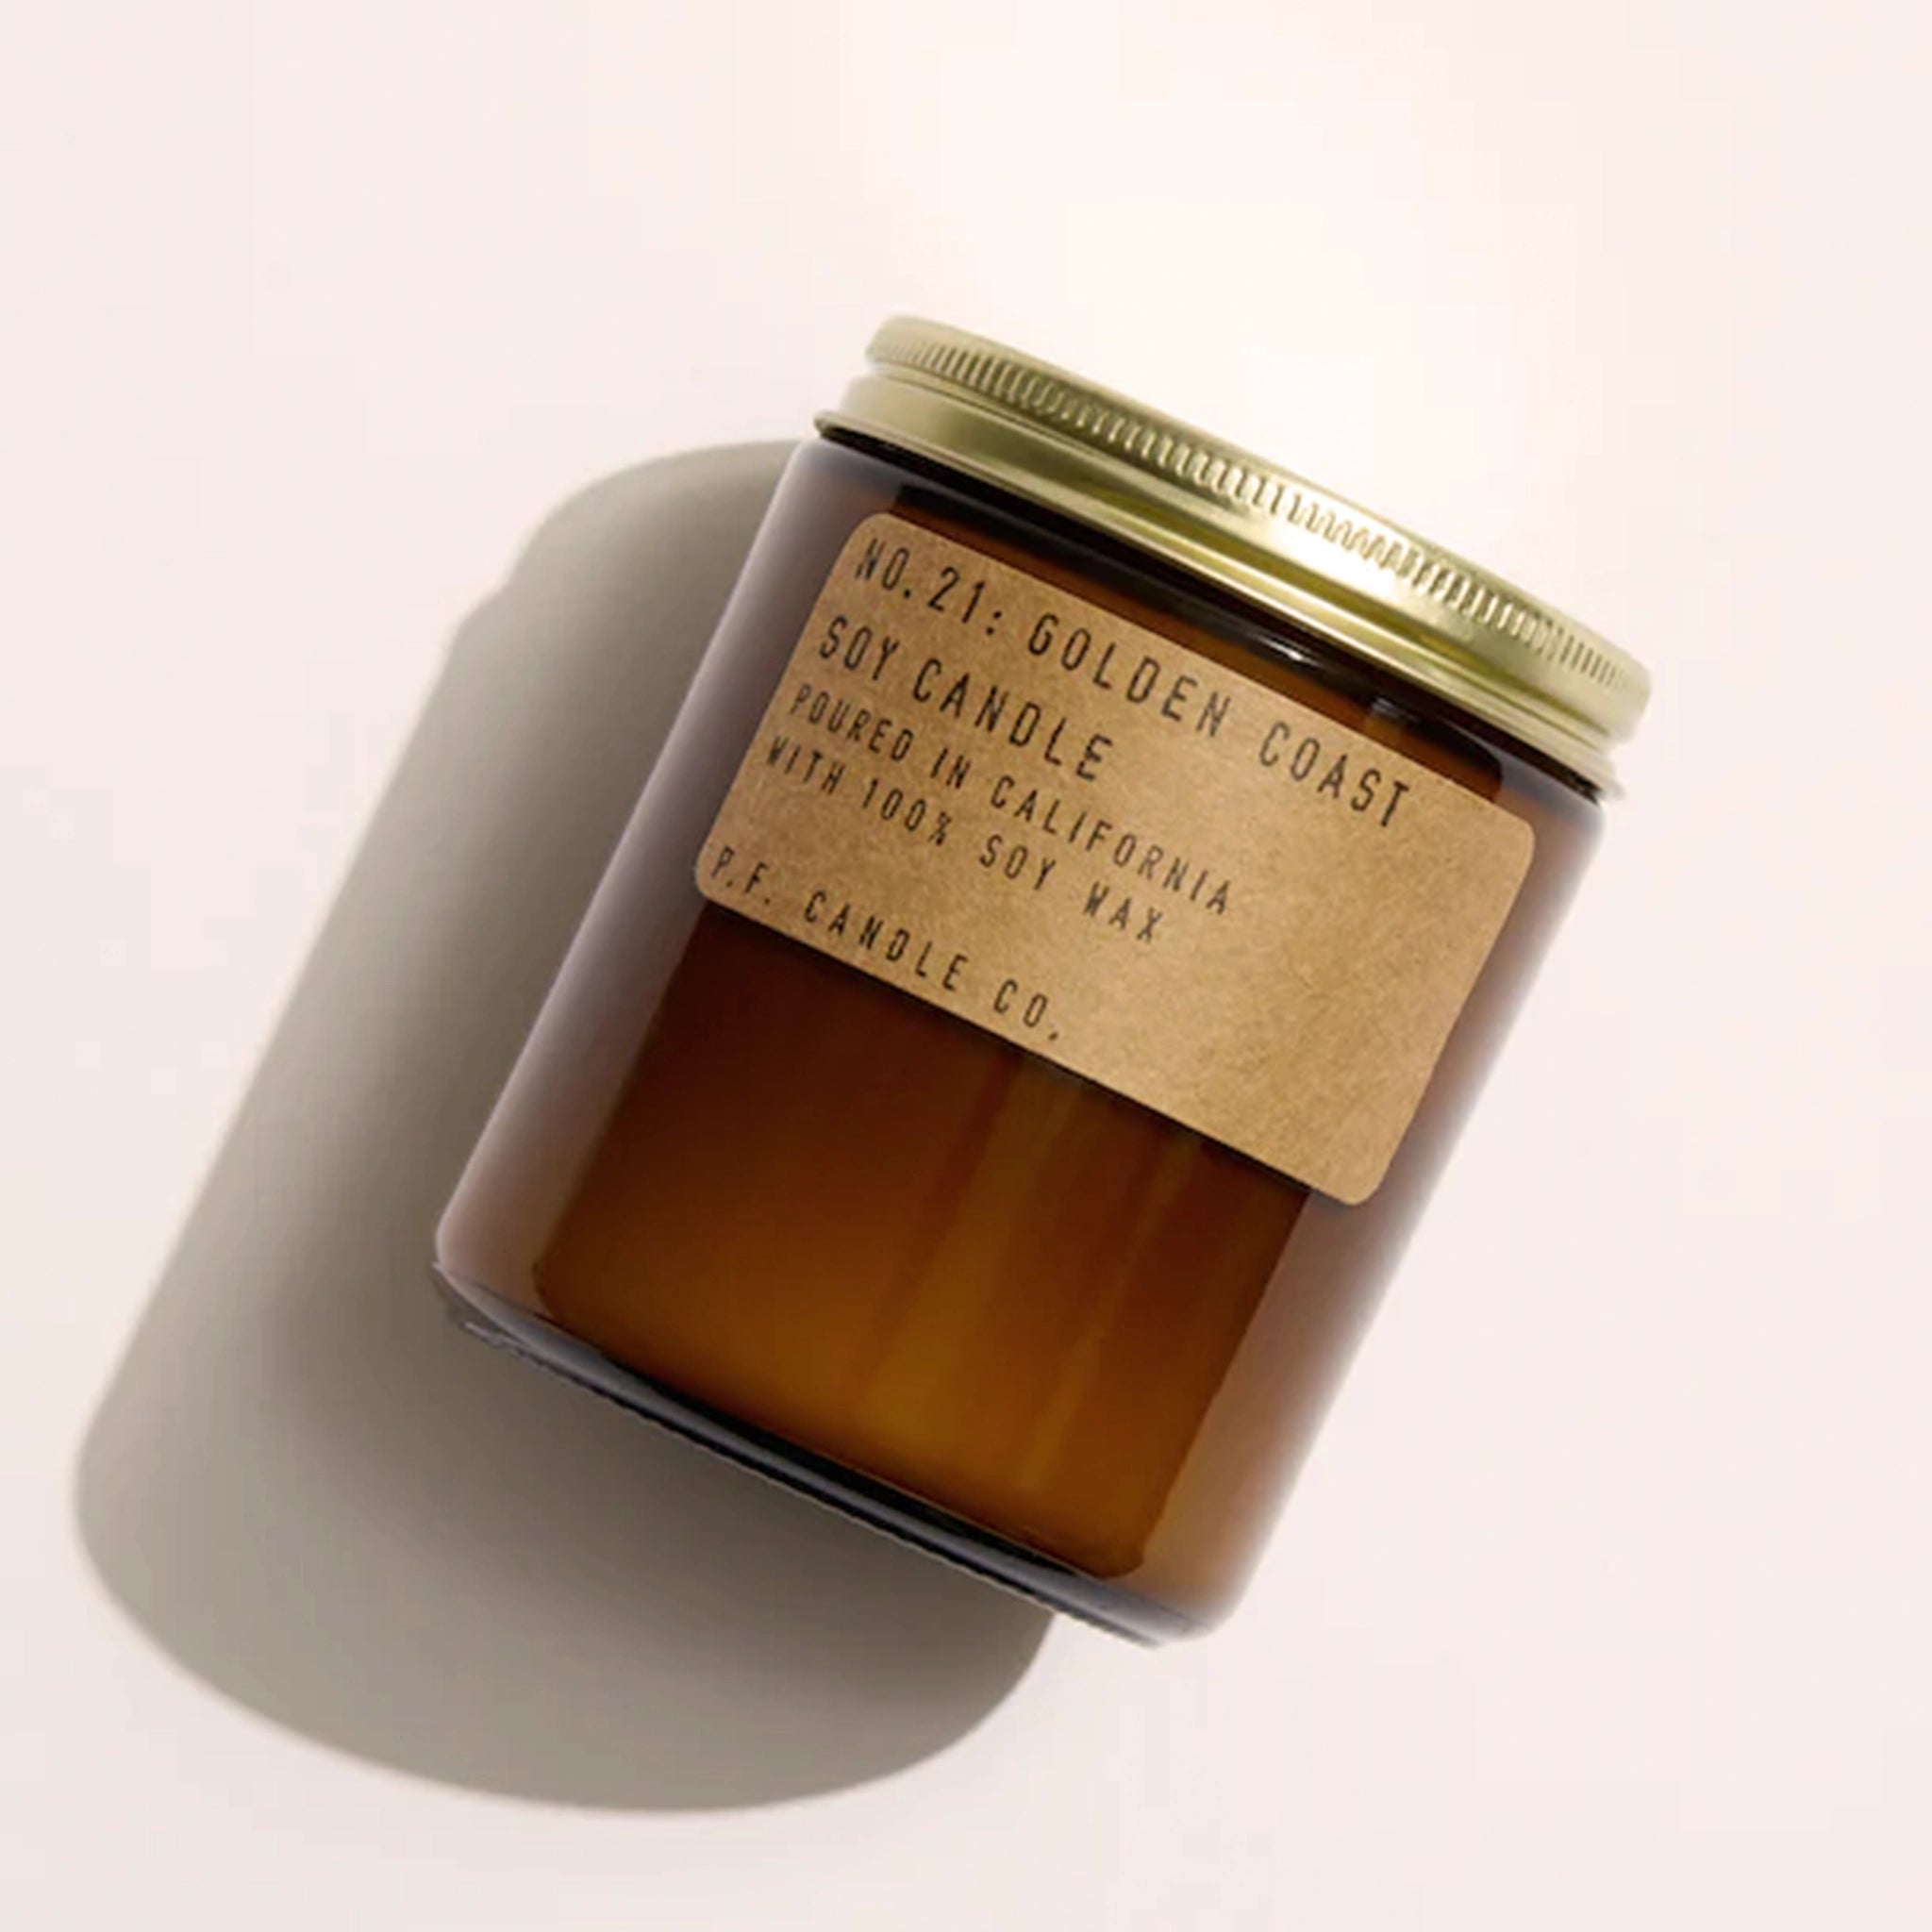 Candle features amber glass with a gold lid. The label is kraft paper with typewriter font that reads "No.21: Golden Coast Soy Candle Handmade in California with 100% Soy Wax. P.F. Candle Co."